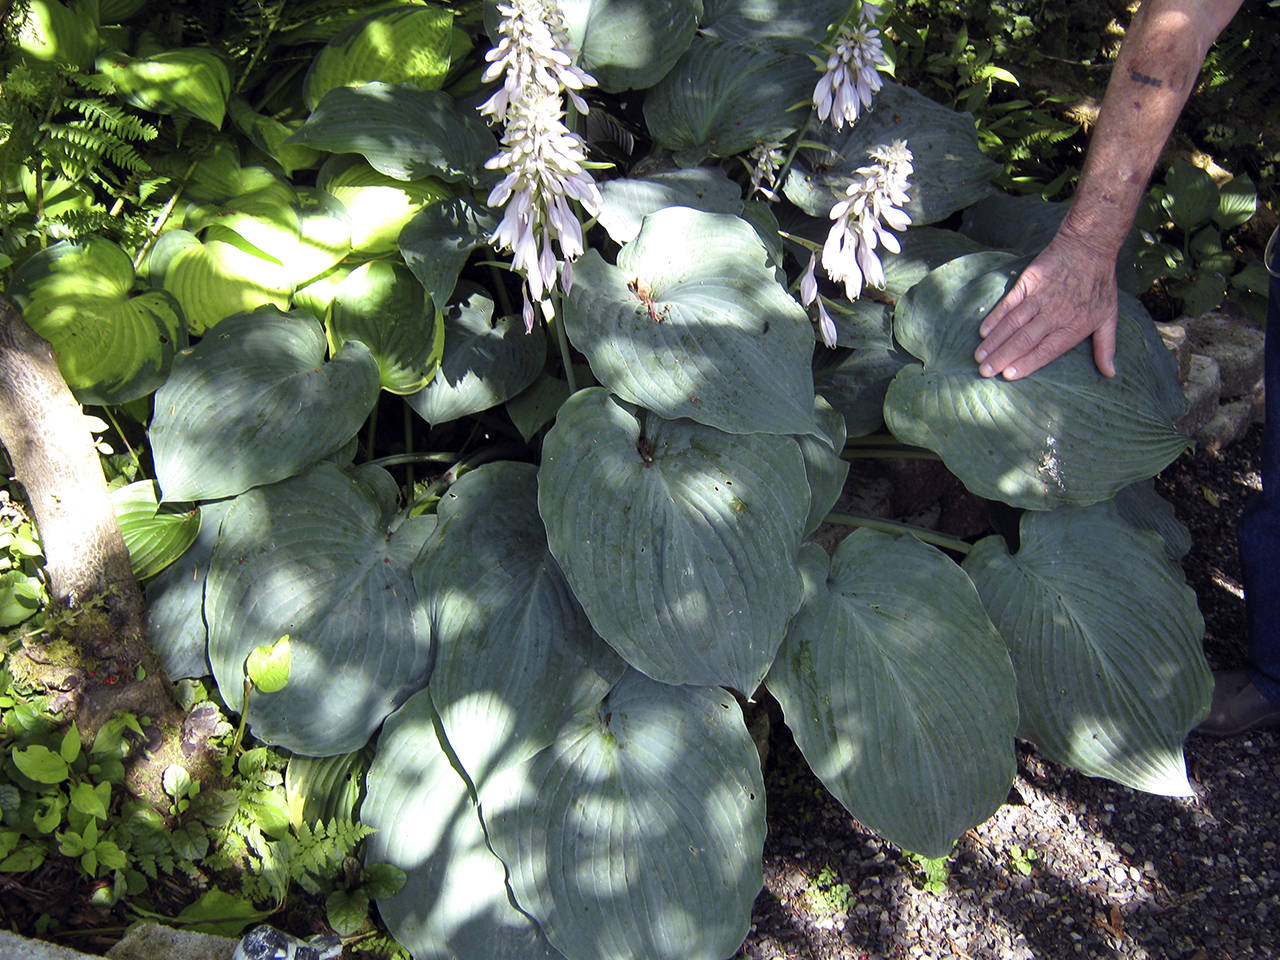 (Photo by Mary Shane) The man’s hand shows the size of this Blue Angel hosta growing in a Montesano garden.